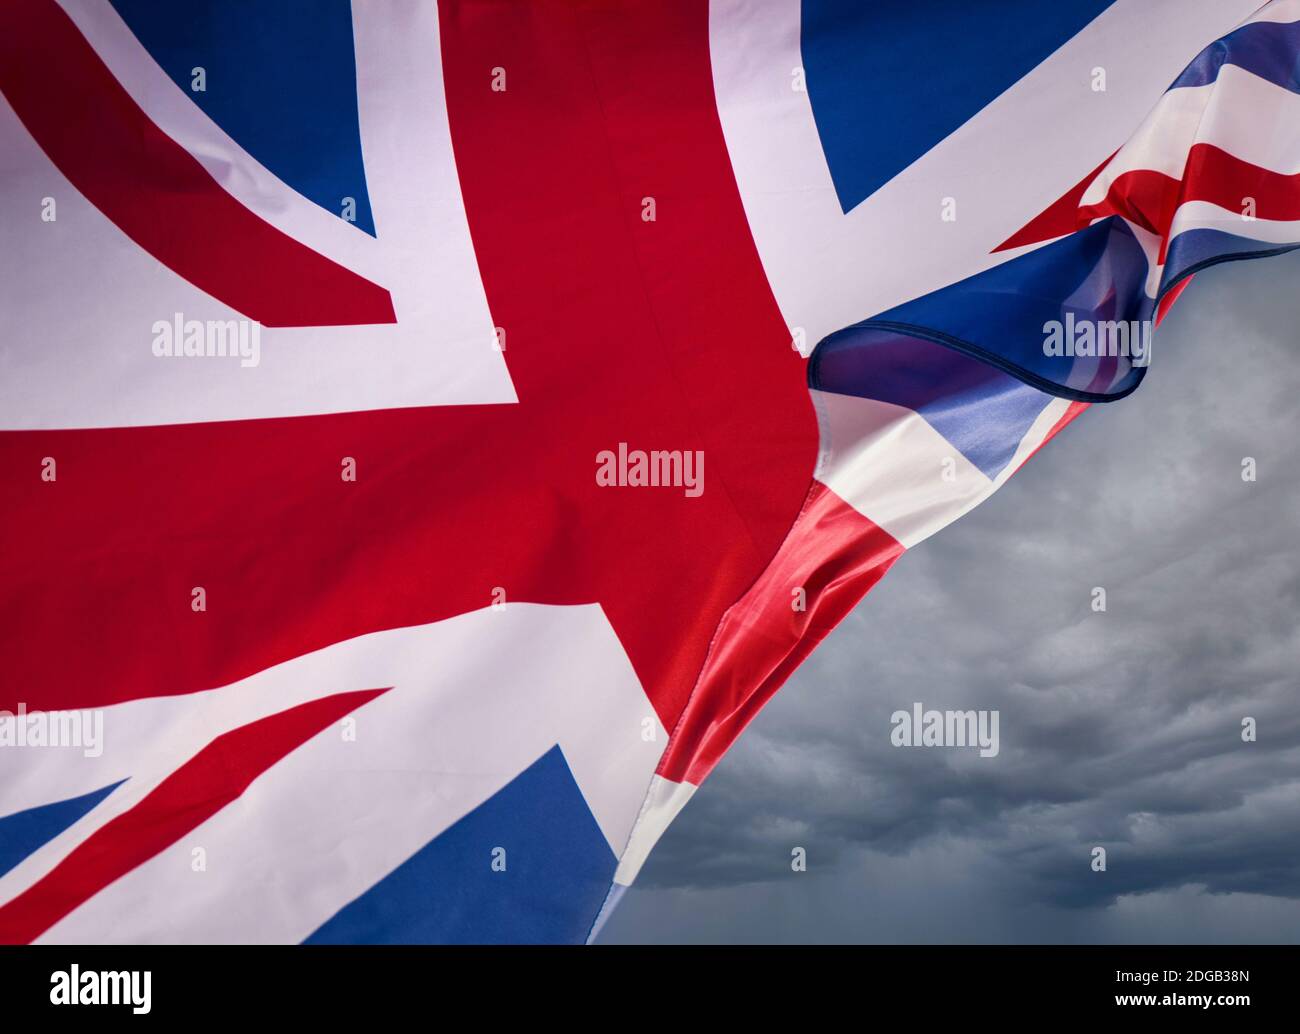 EU Brexit concept UK Union Jack Flag flying with breeze blowing through revealing brooding dark sky behind as metaphor for problems and concept for UK Borders Brexit Immigration Fisheries negotiations etc.... Stock Photo